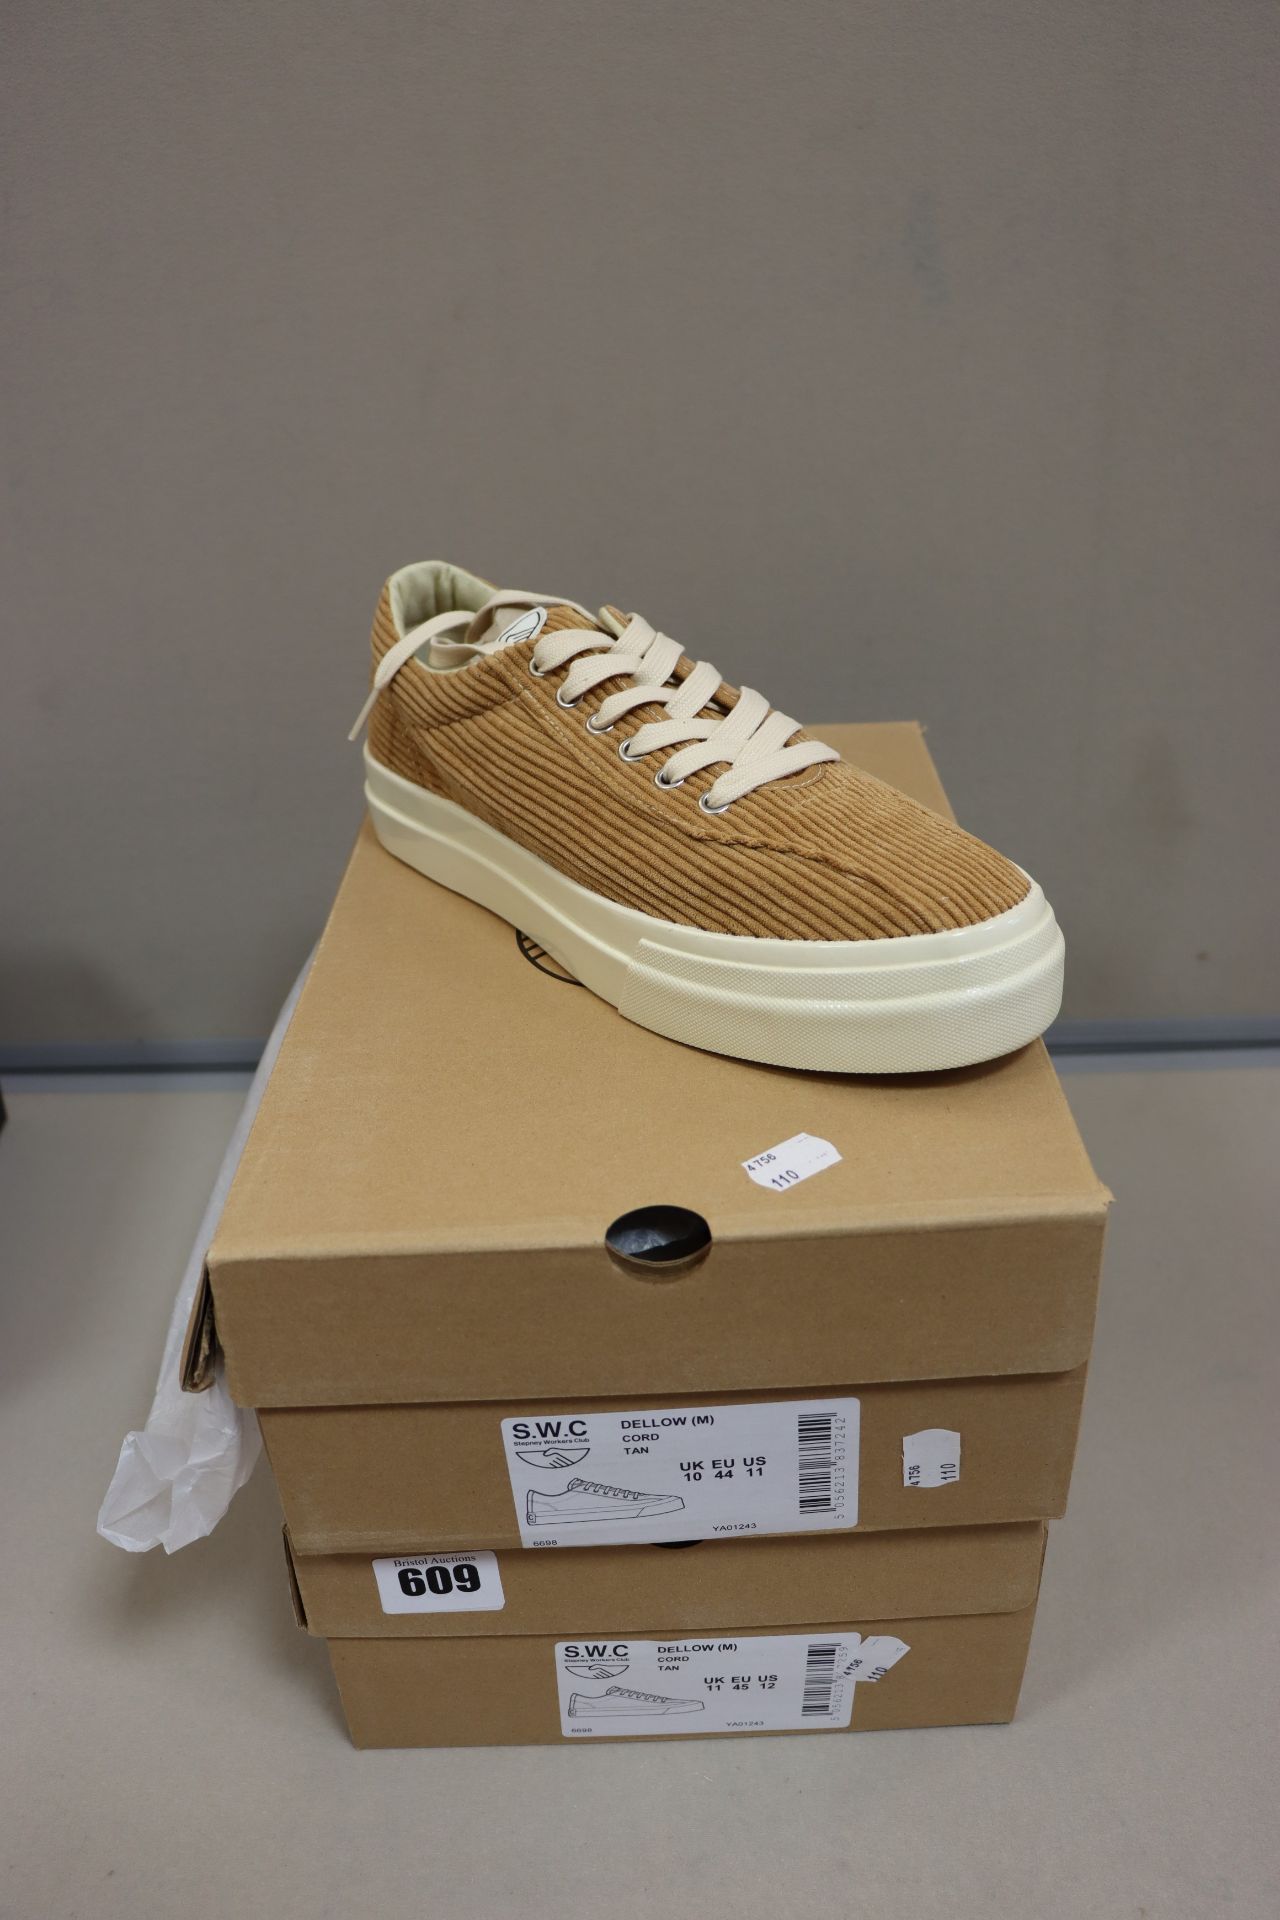 One boxed as new Stepney Workers Club Dellow Cord Tan sneakers size UK 11. One boxed as new